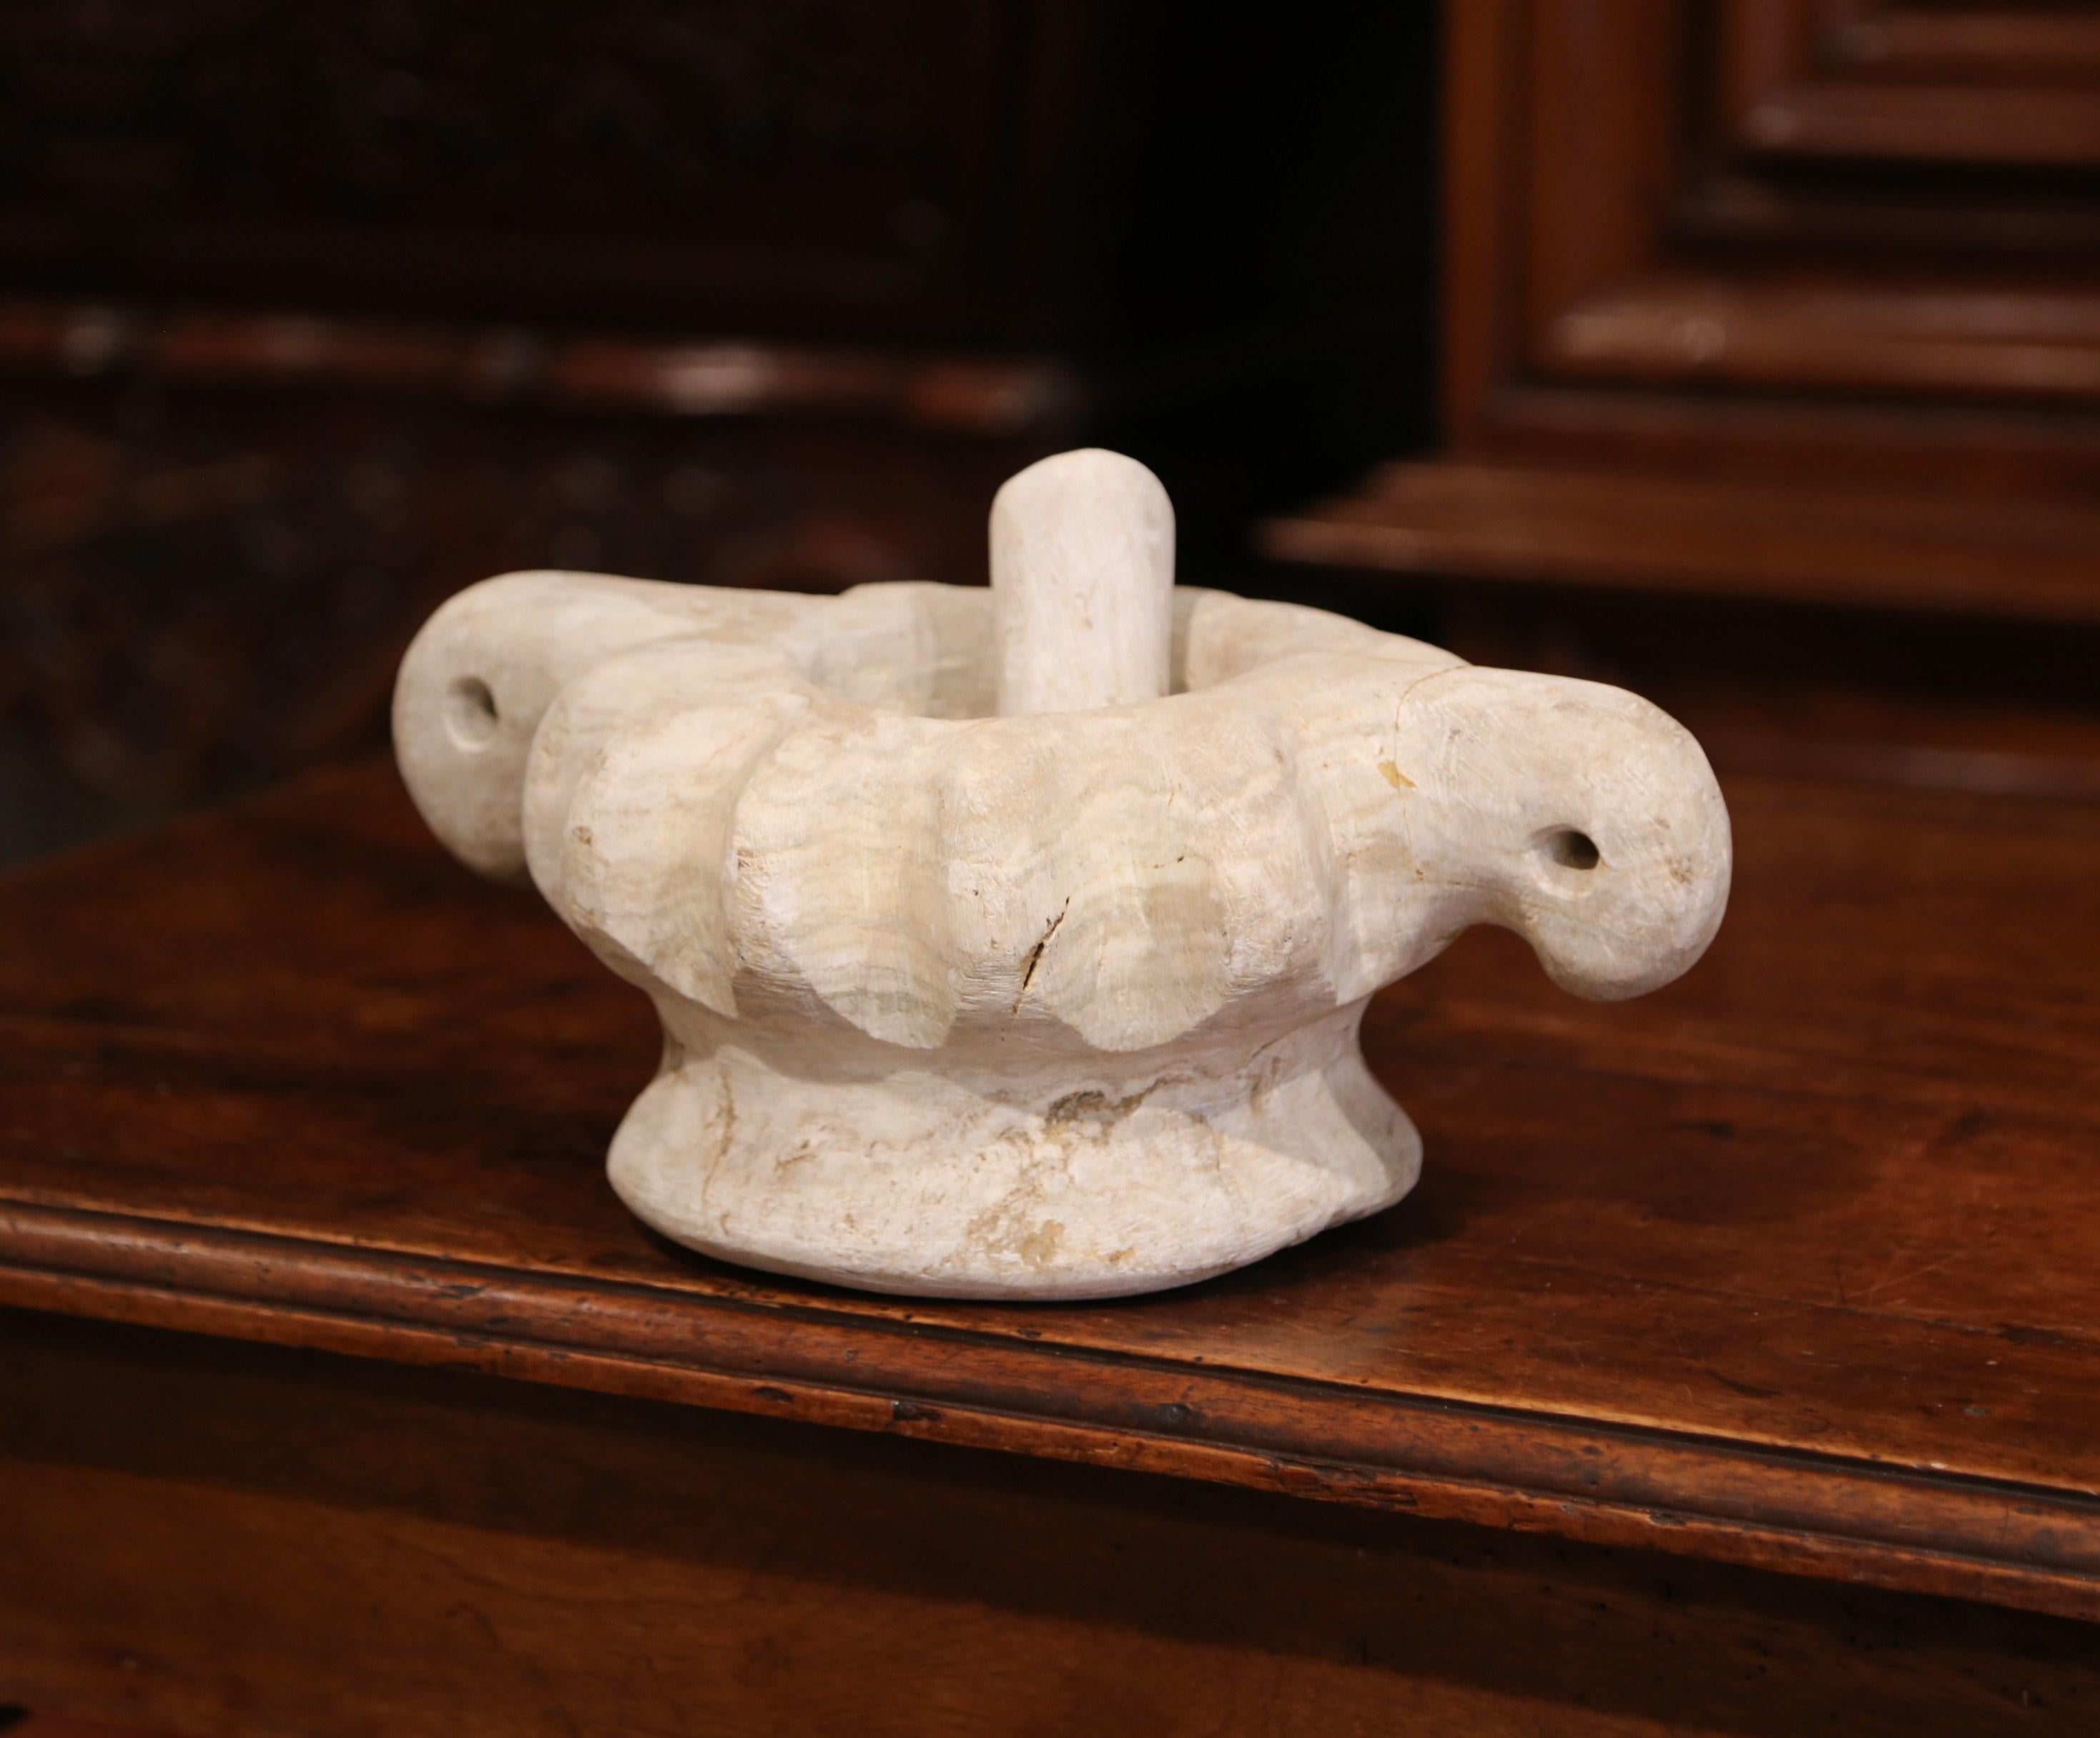 Grind spices in your kitchen with this hand carved, antique white stone mortar. Created in Turkey, circa 1880, this traditional mortar and pestle is round in shape and has a shell-like scalloped detail. The cooking tool is in very good condition